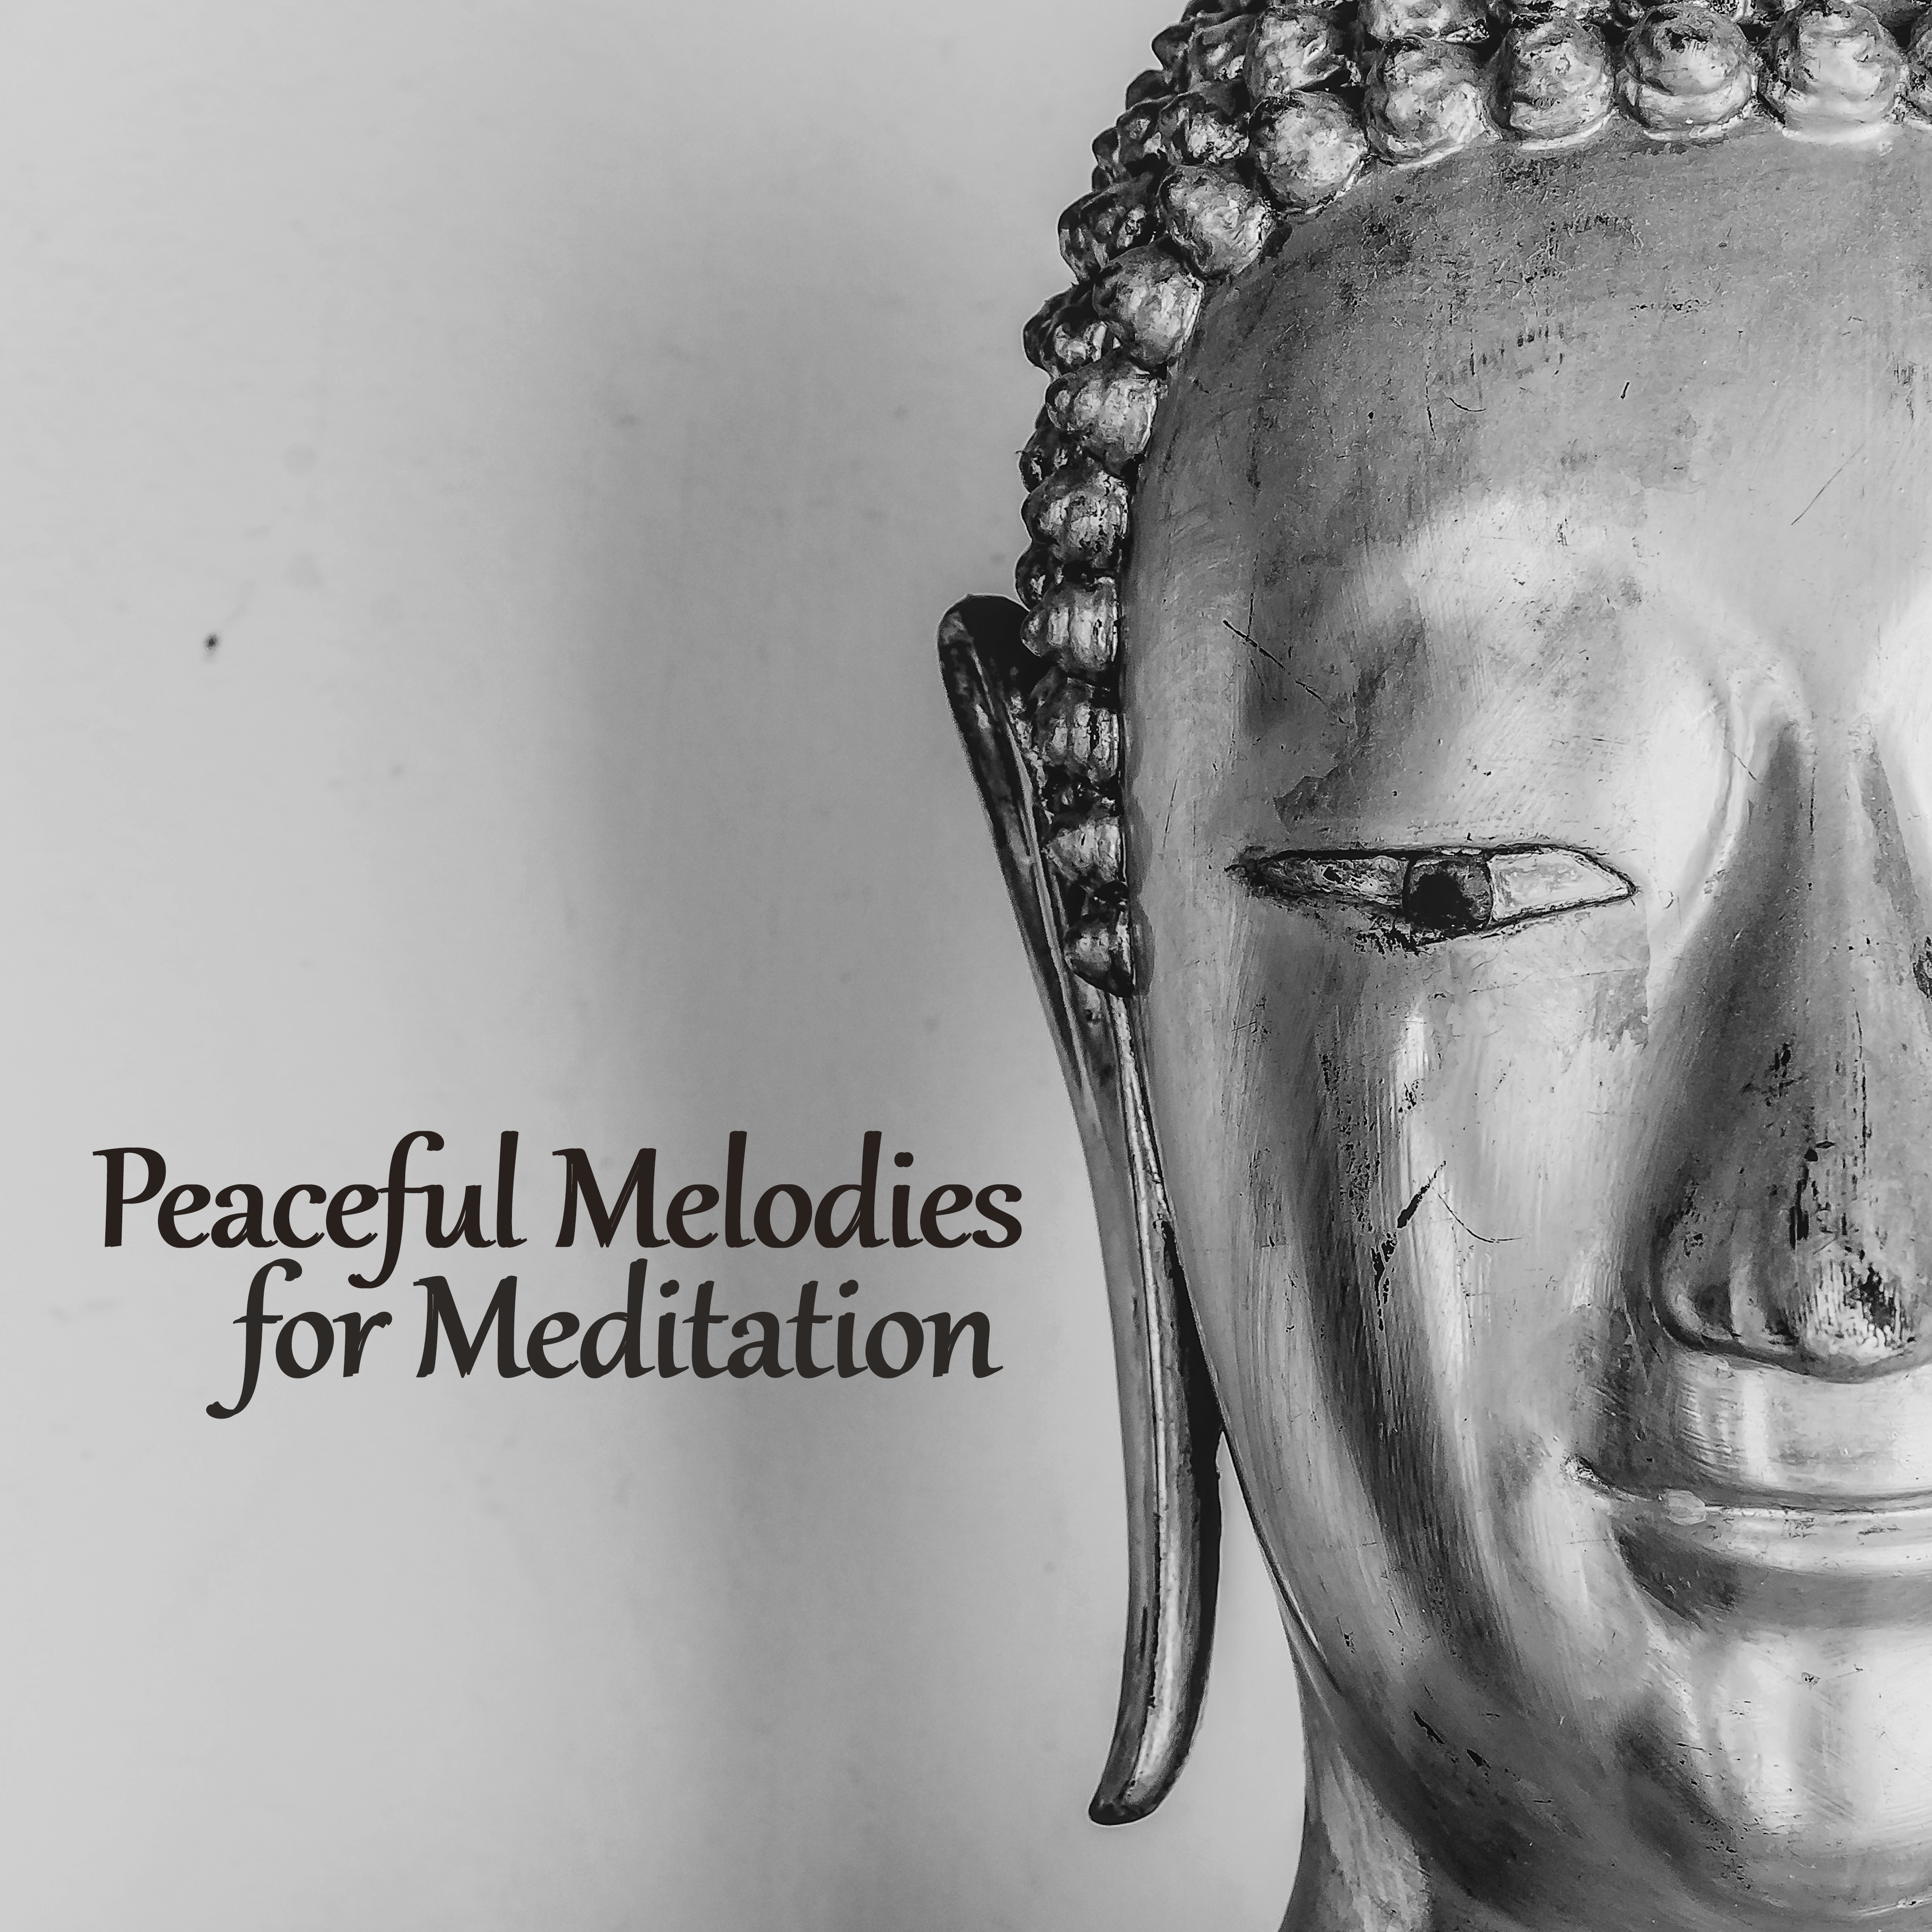 Peaceful Melodies for Meditation